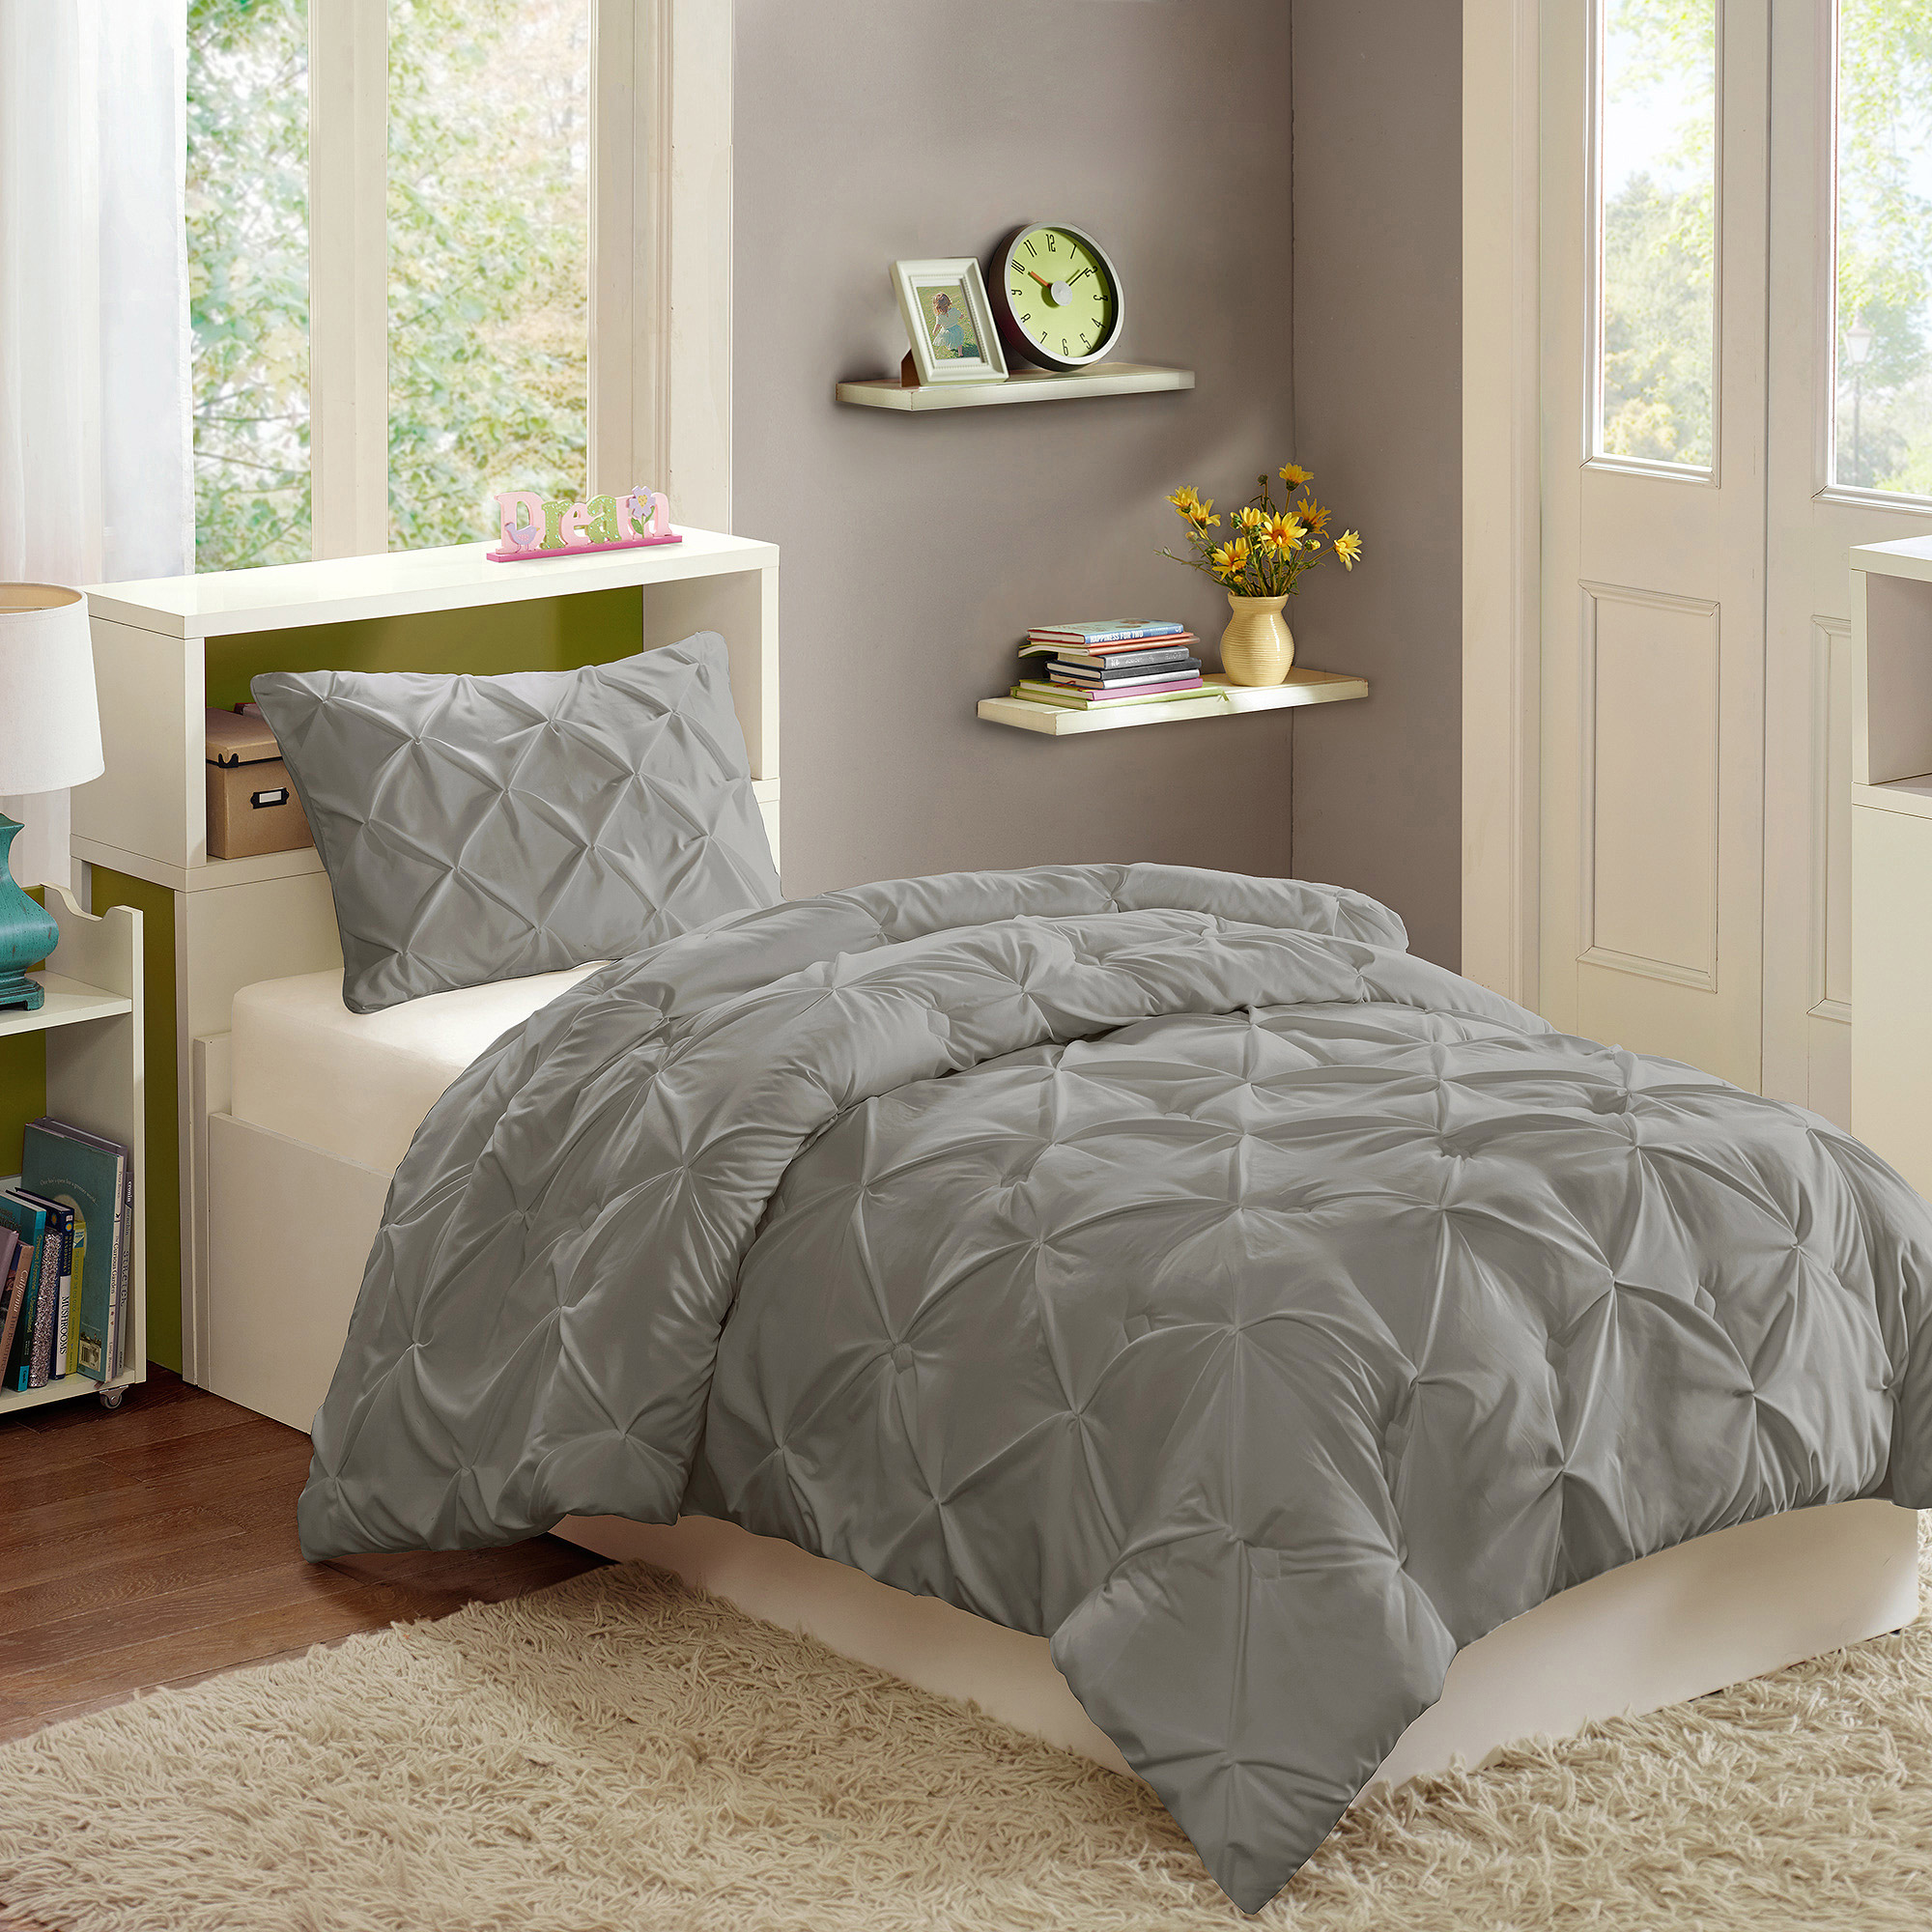 Better Homes and Gardens Tufted Comforter Mini Set - image 1 of 1